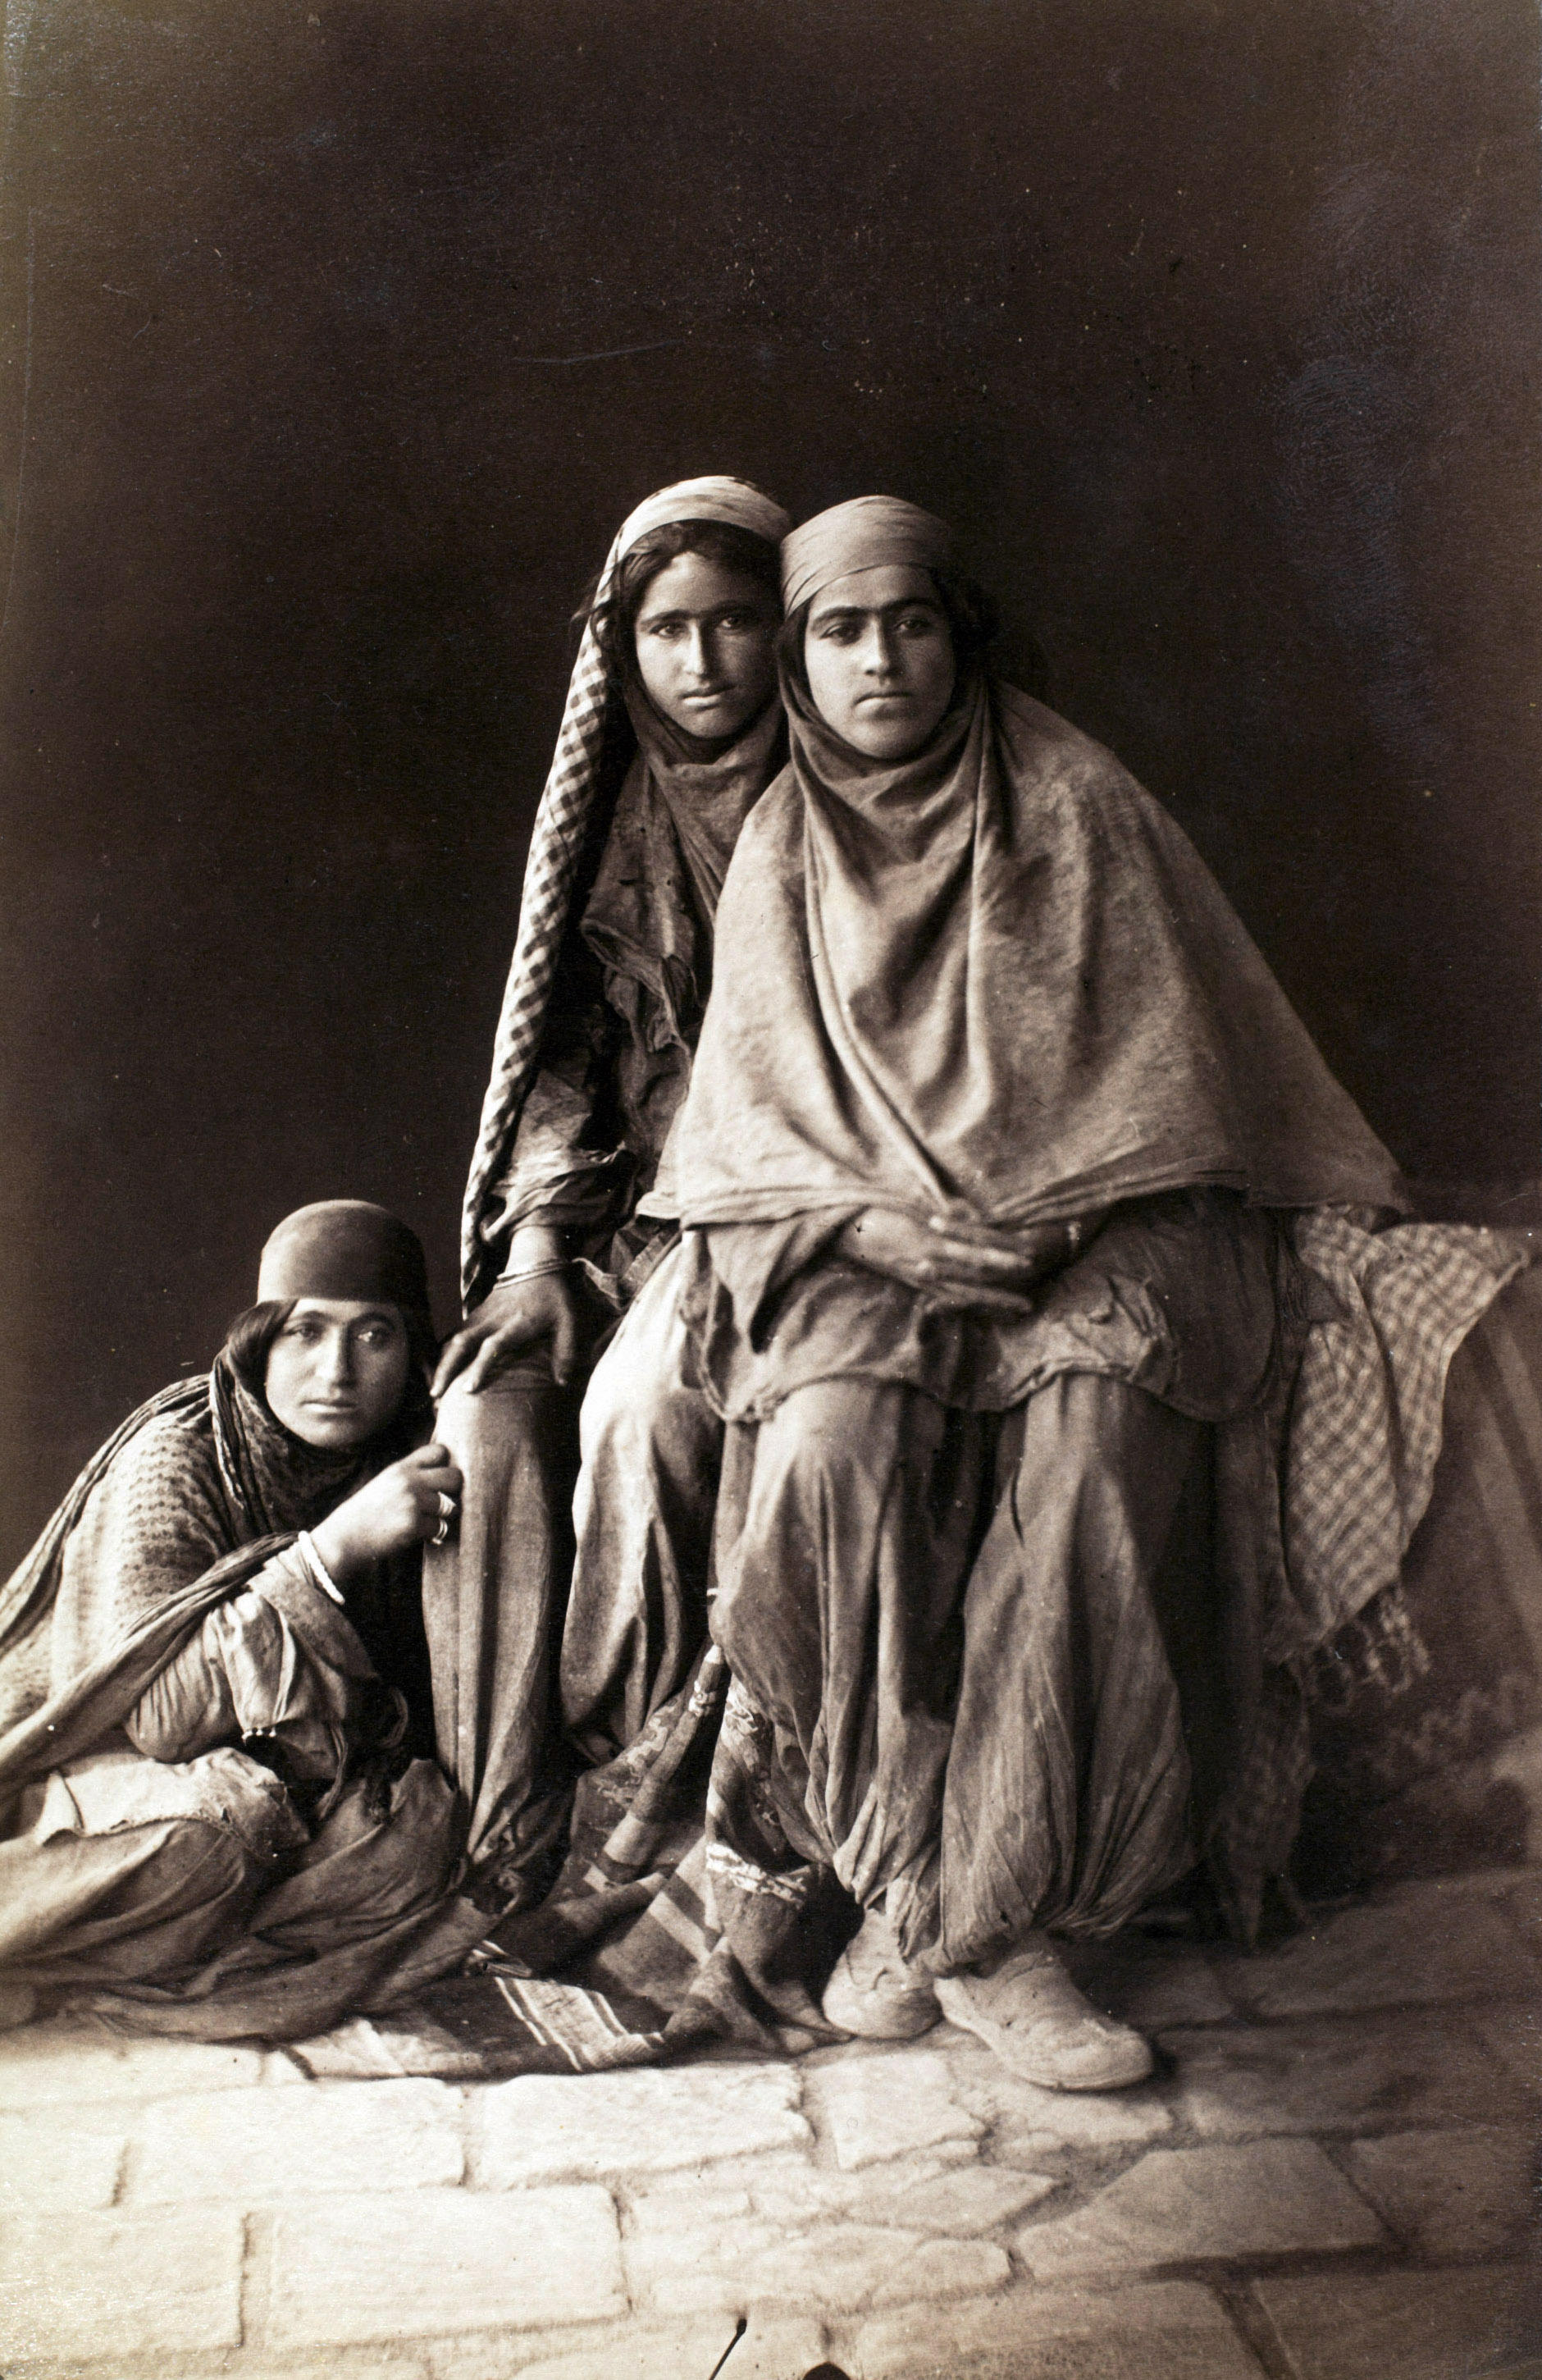 Three women tiredly look at Antoin Sevruguin as he photographs them in the late 19th century.